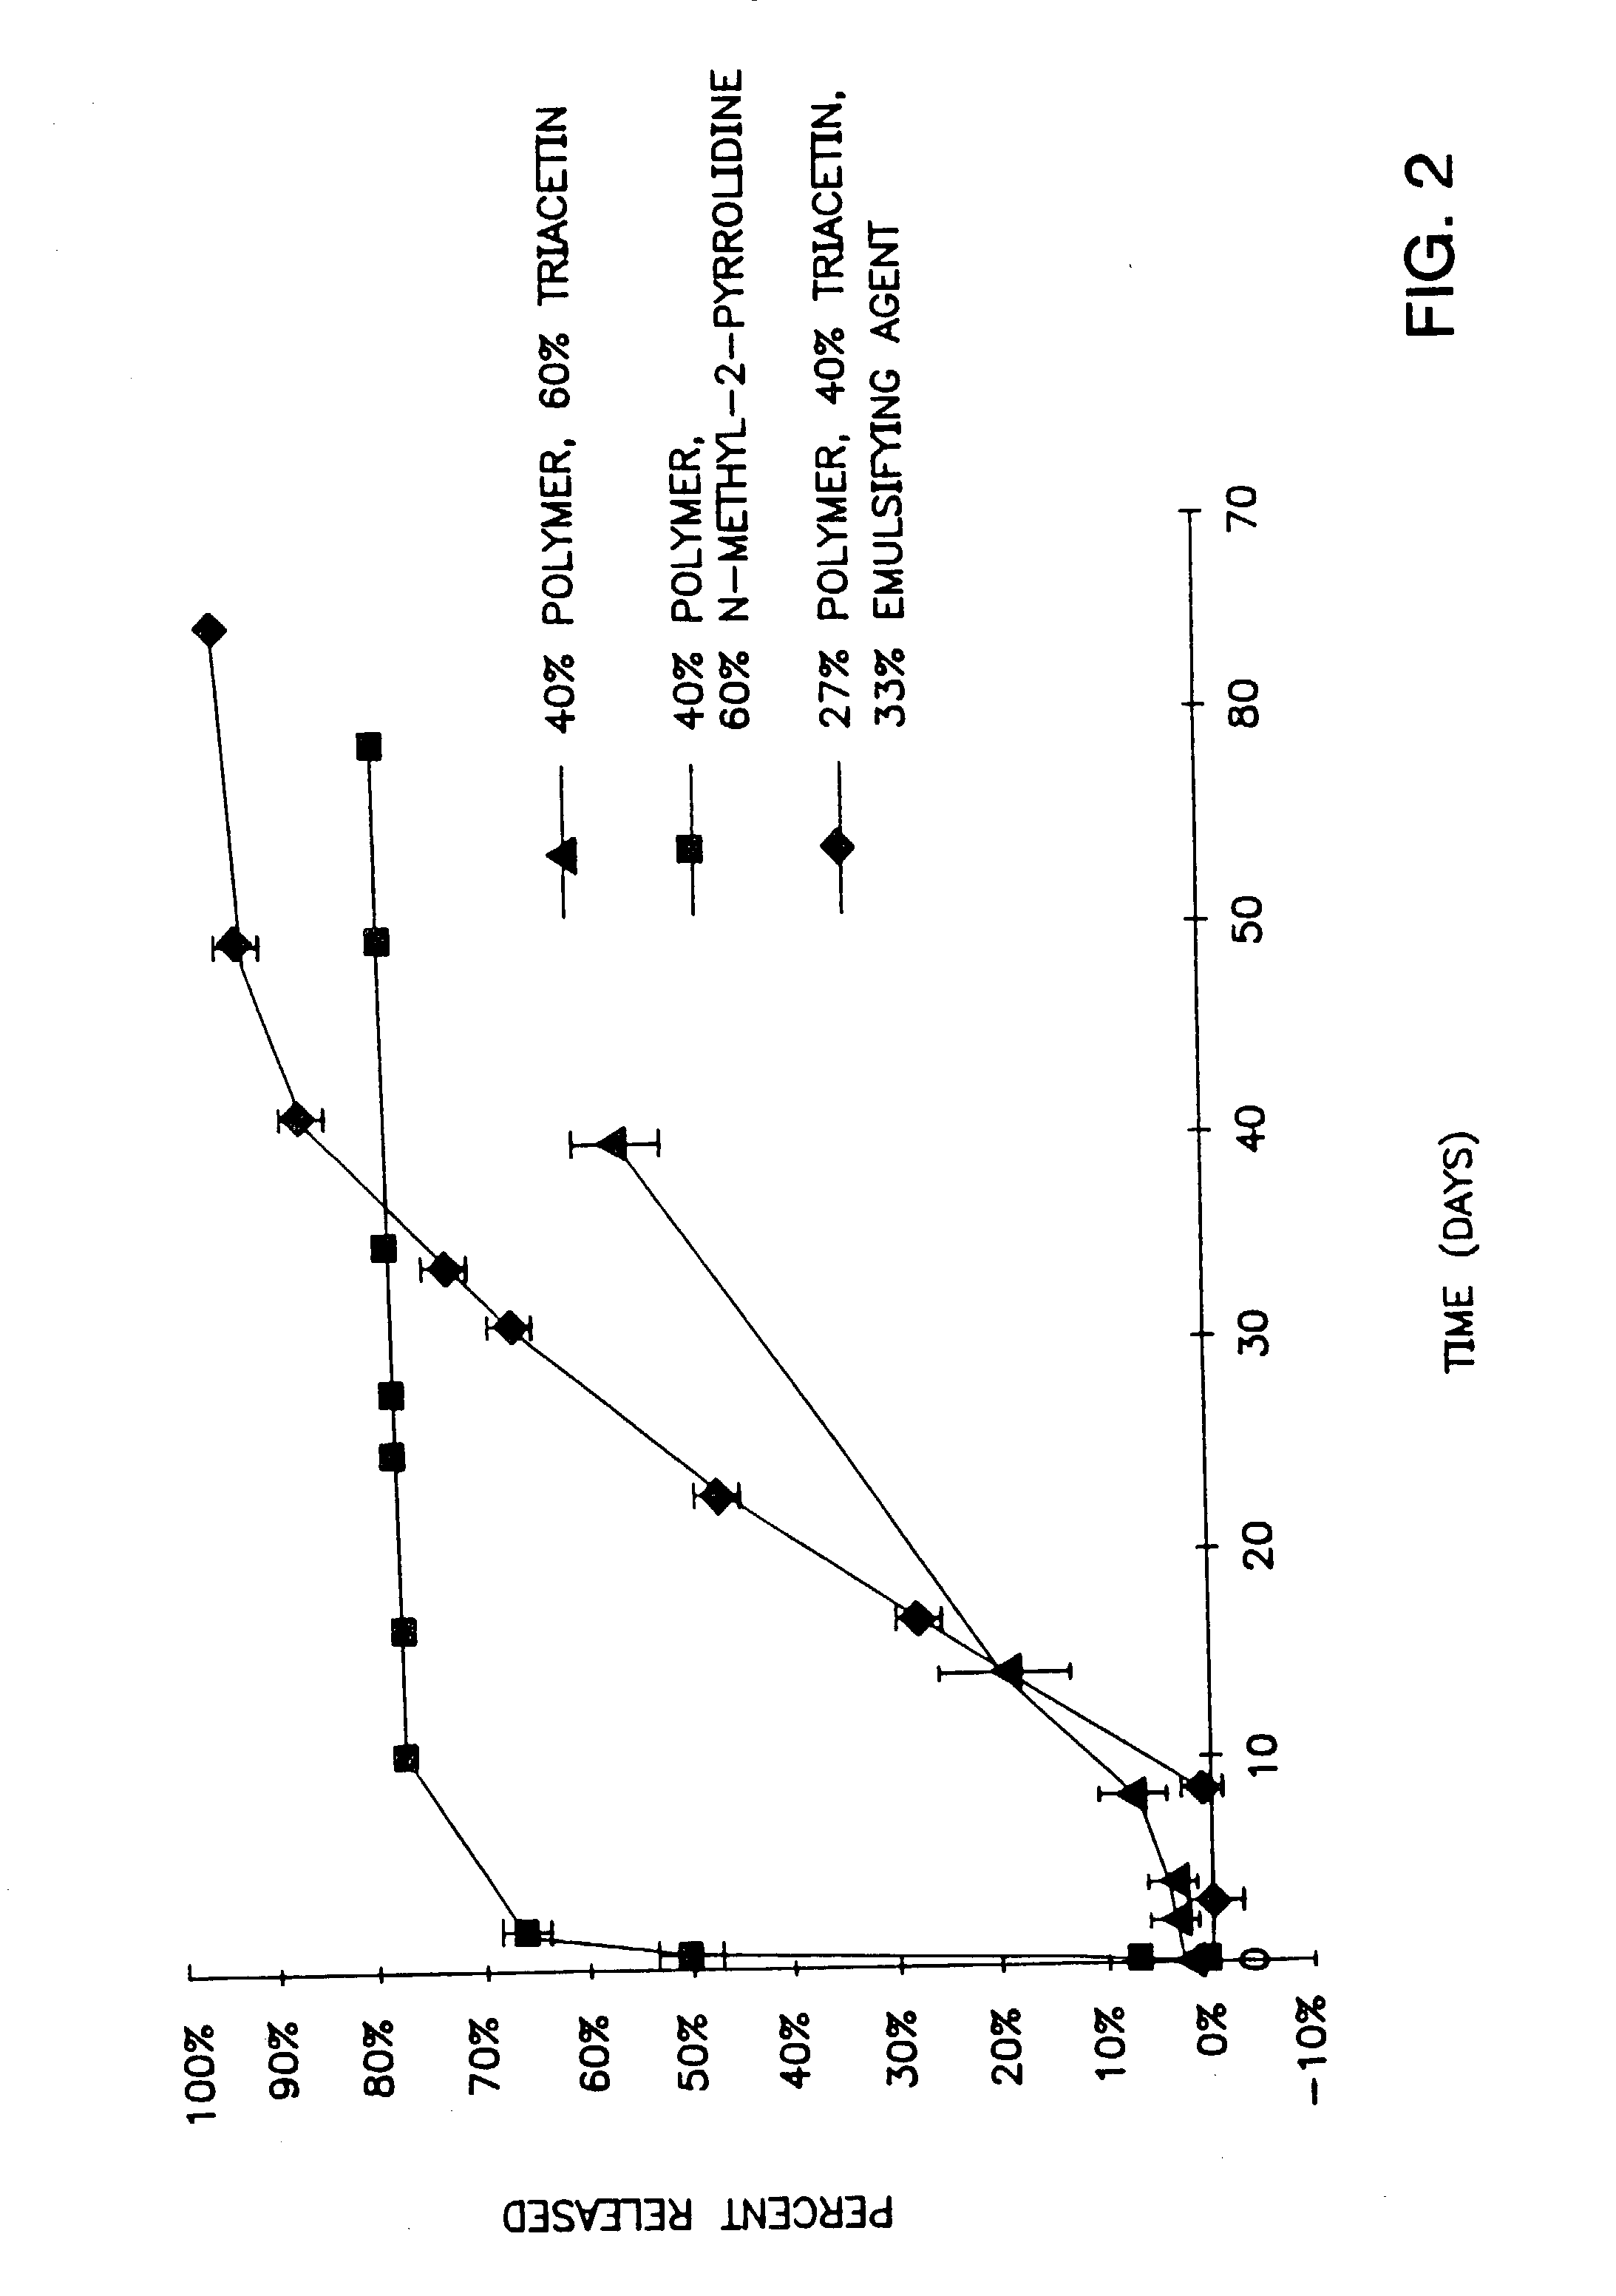 Gel composition and methods